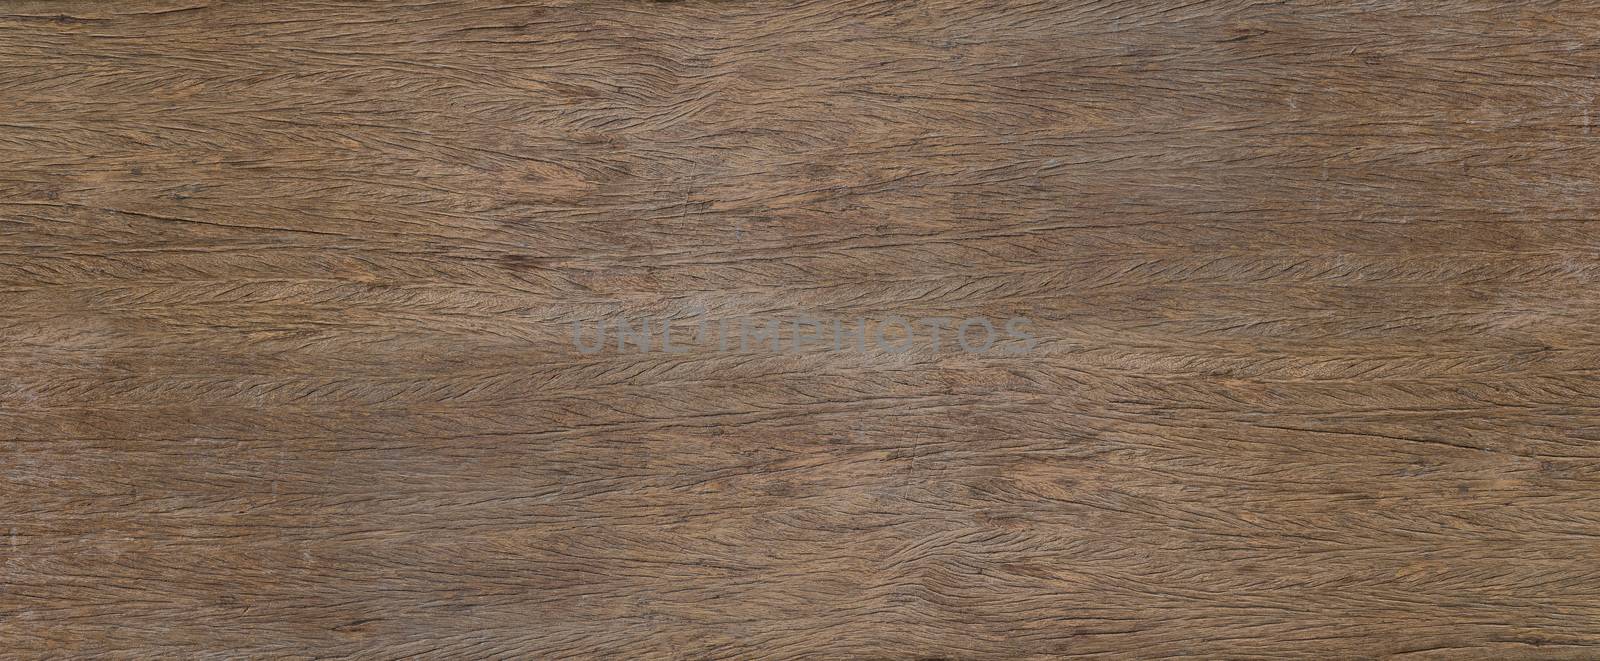 wood wall texture blank for design background